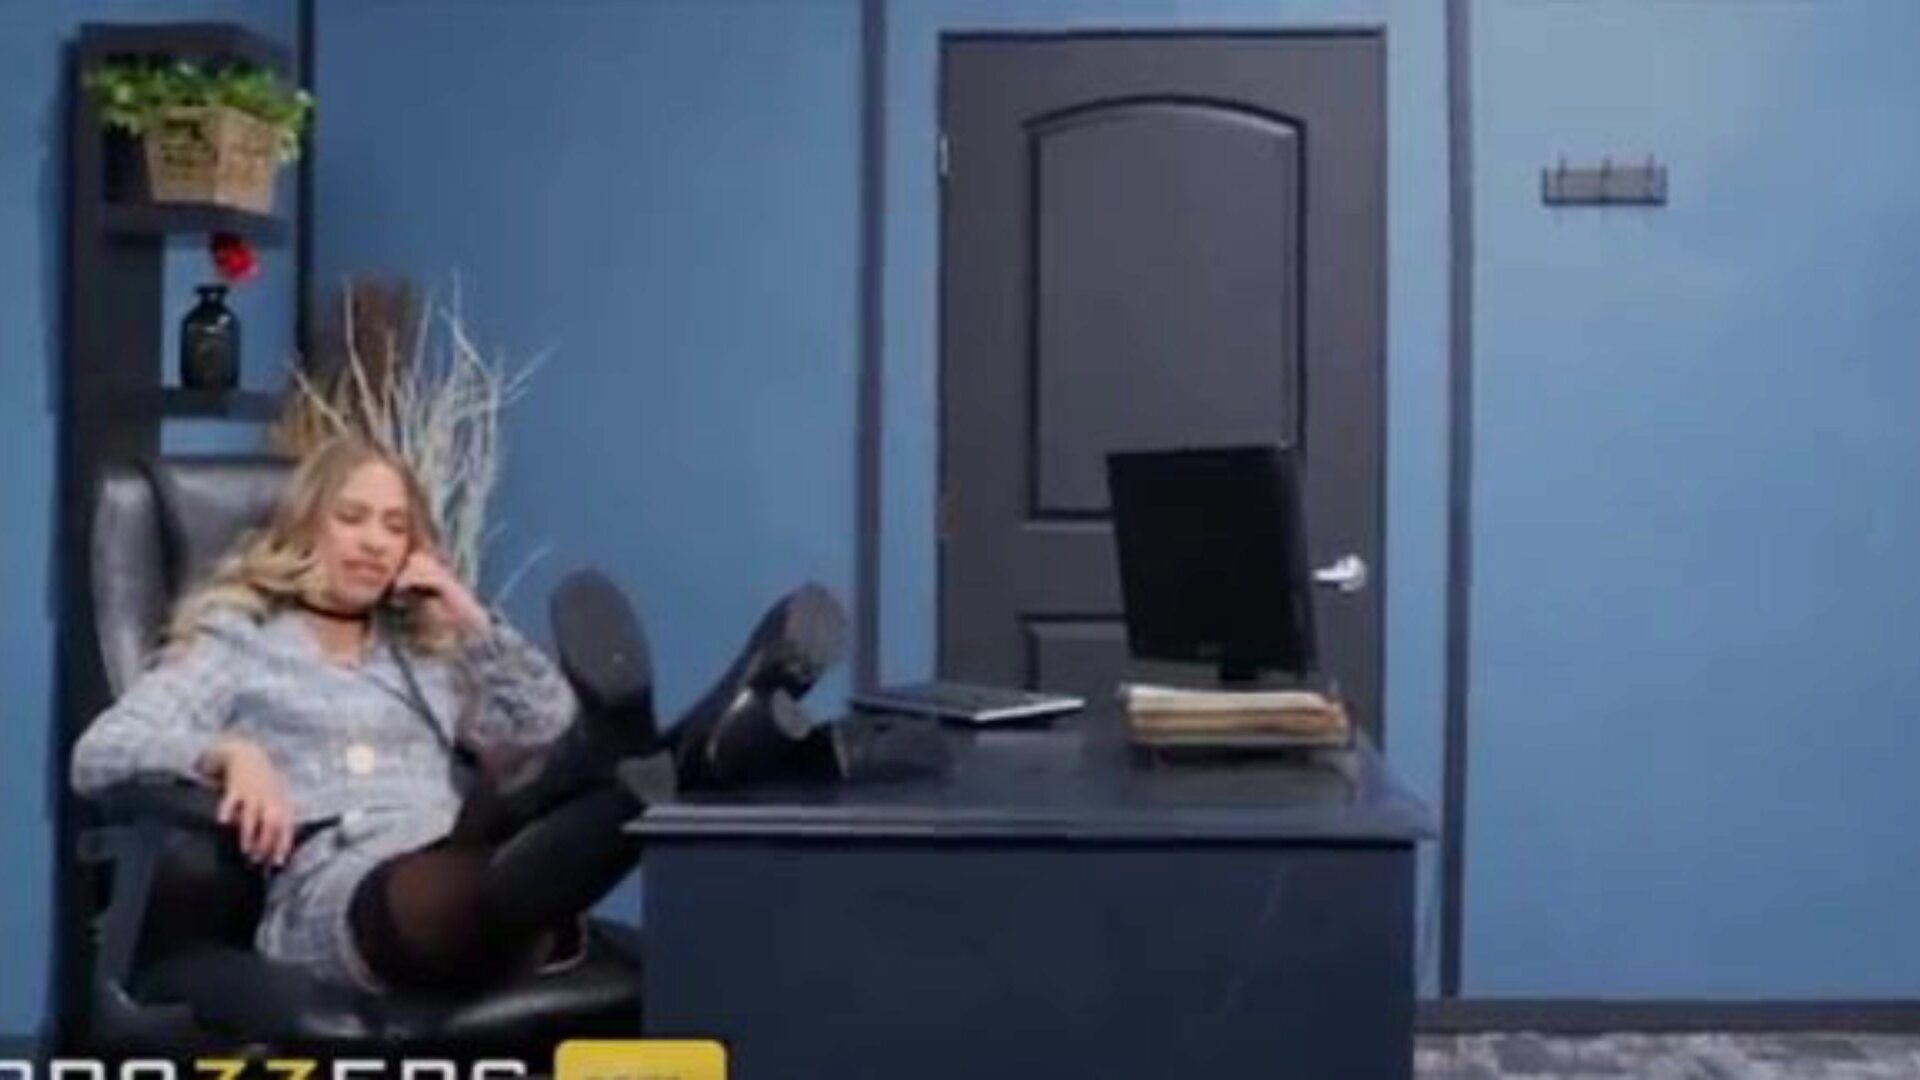 Hot Blonde Secretary (Khloe Kapri) Pounded Hard By Her Boss While At Work - Brazzers